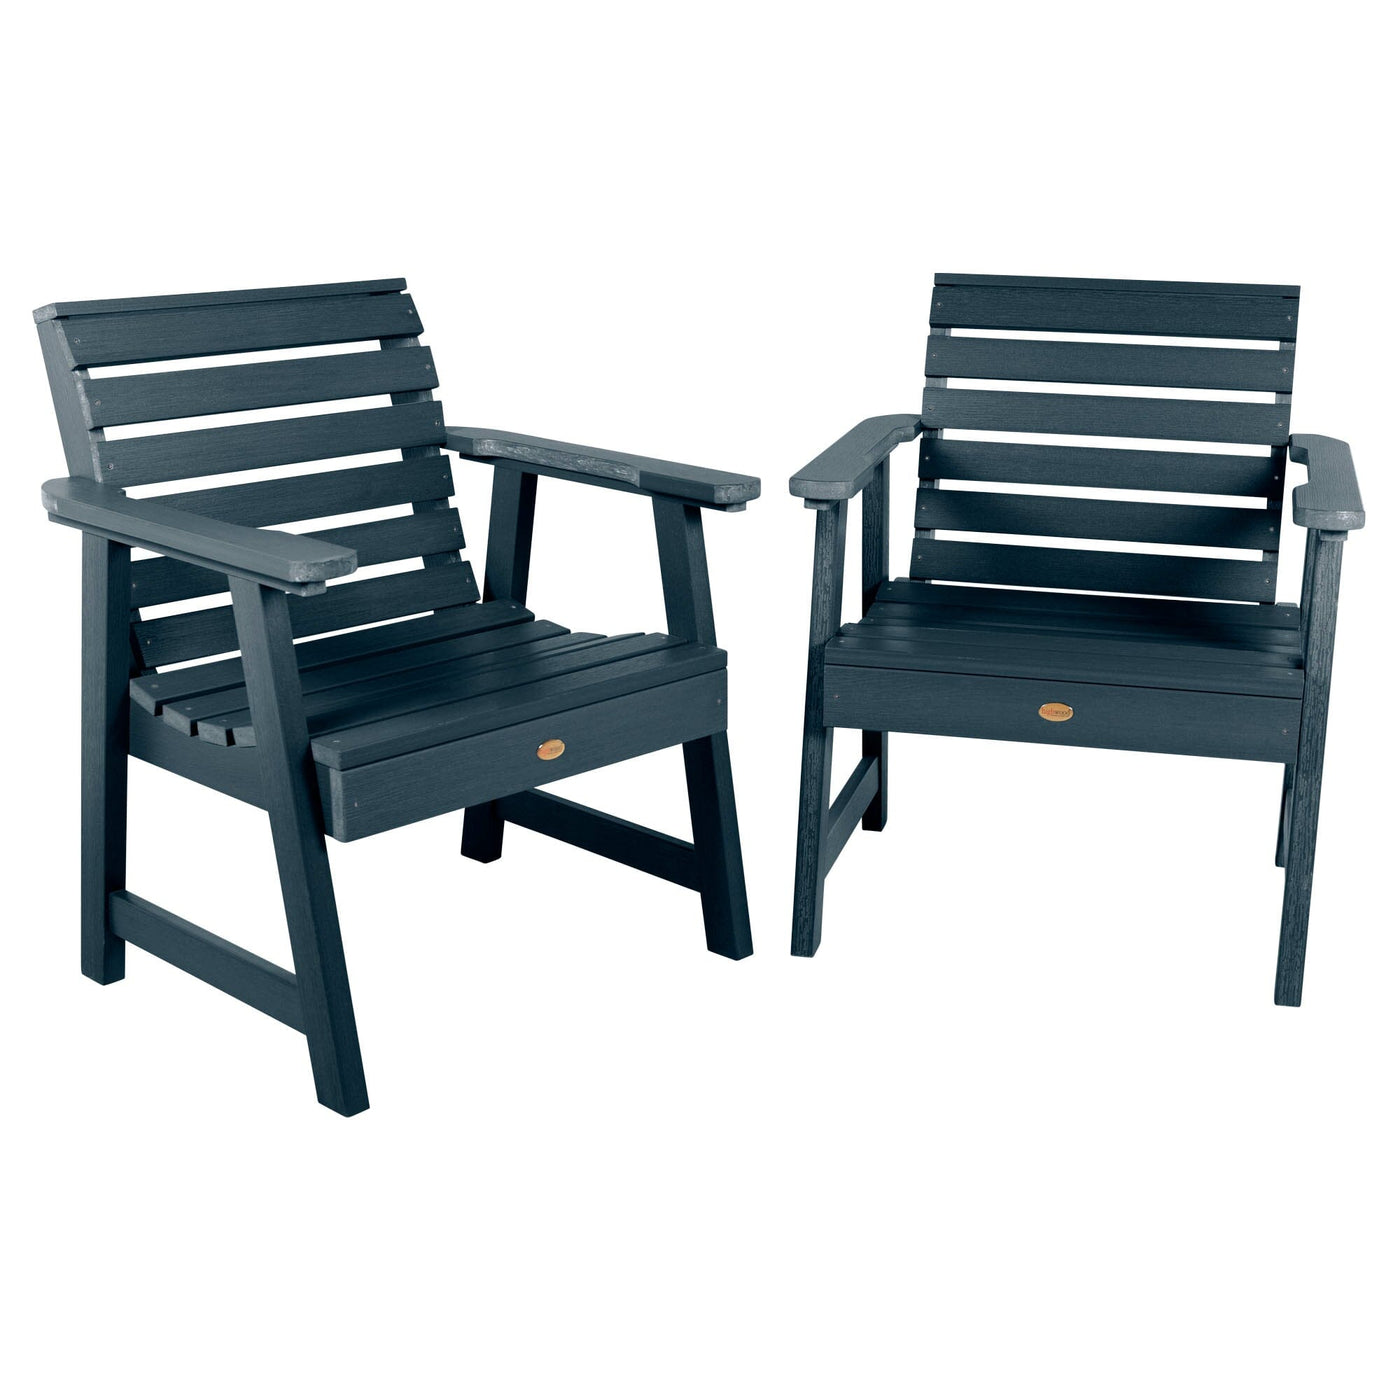 Set of 2 Weatherly Garden Chairs Kitted Sets Highwood USA Federal Blue 